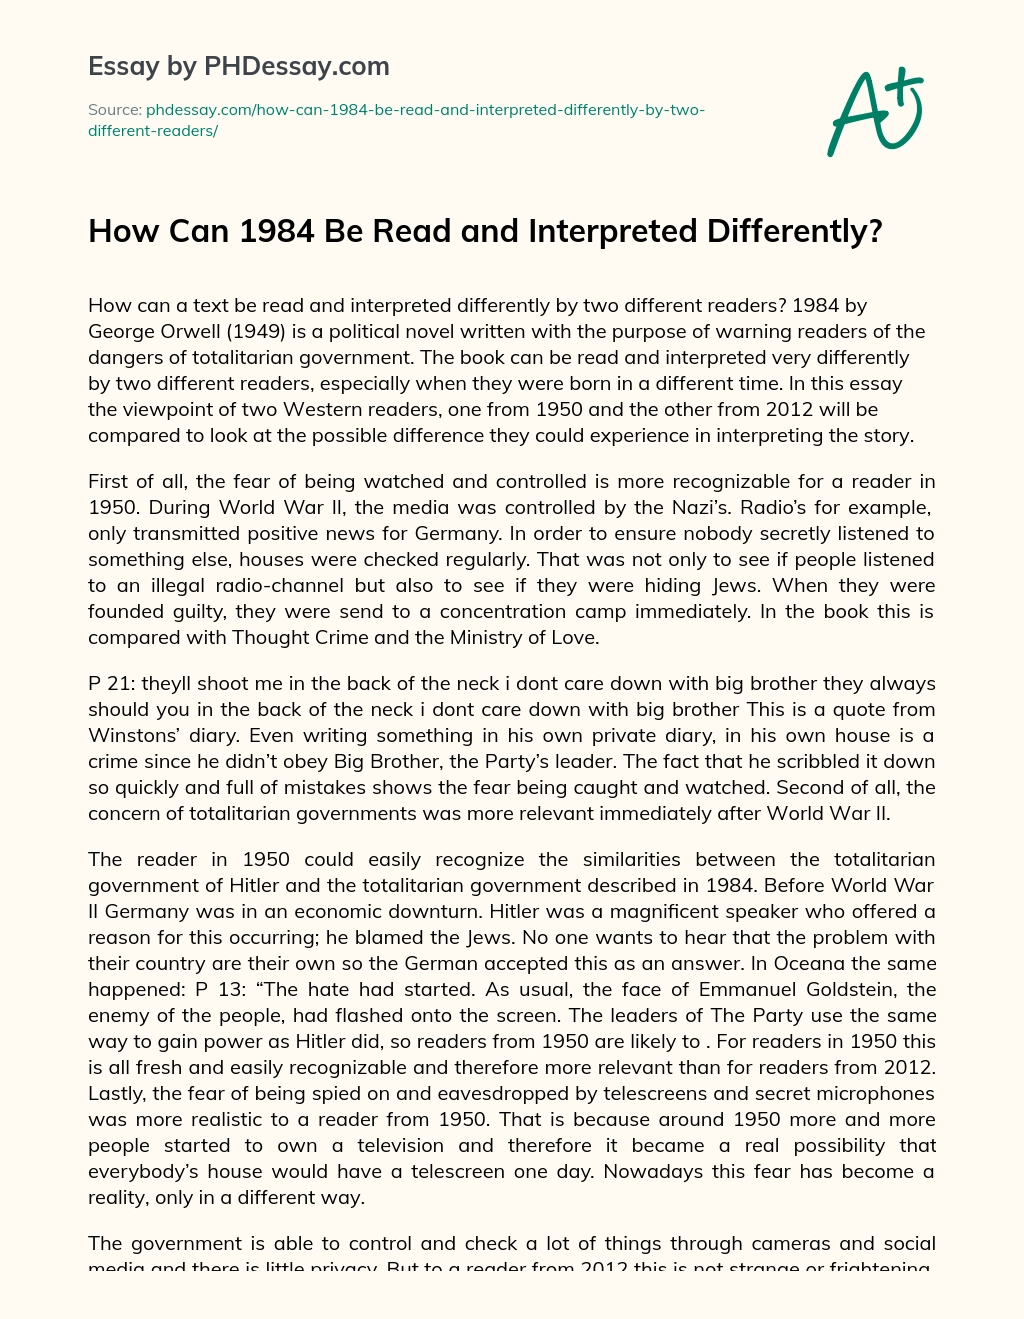 How Can 1984 Be Read and Interpreted Differently? essay